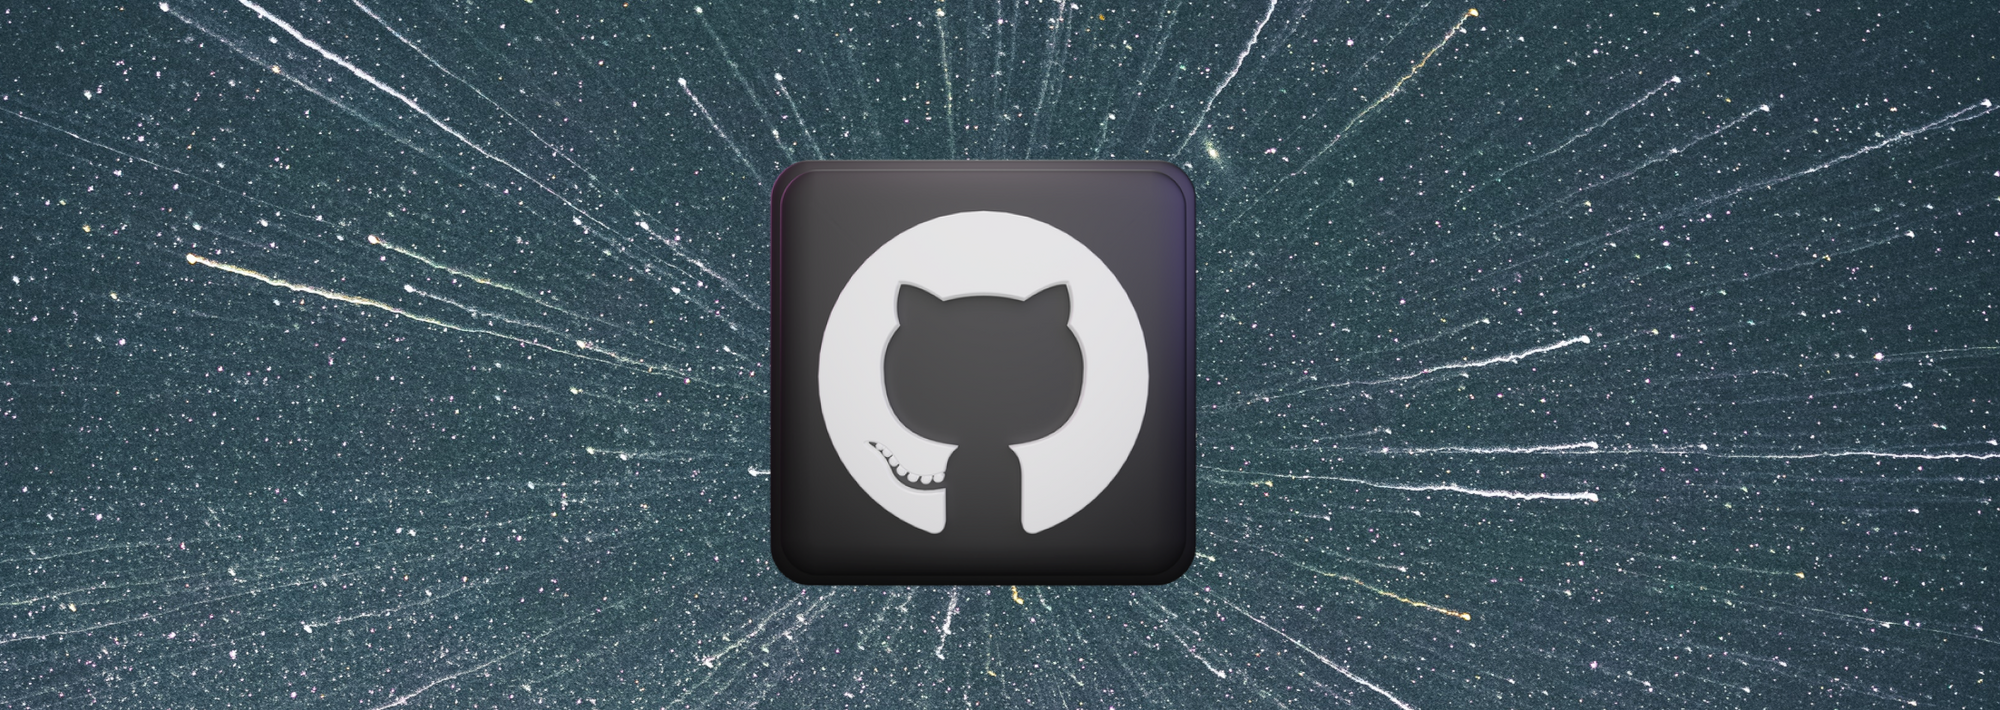 5 Steps to quickly find the best software engineers on GitHub